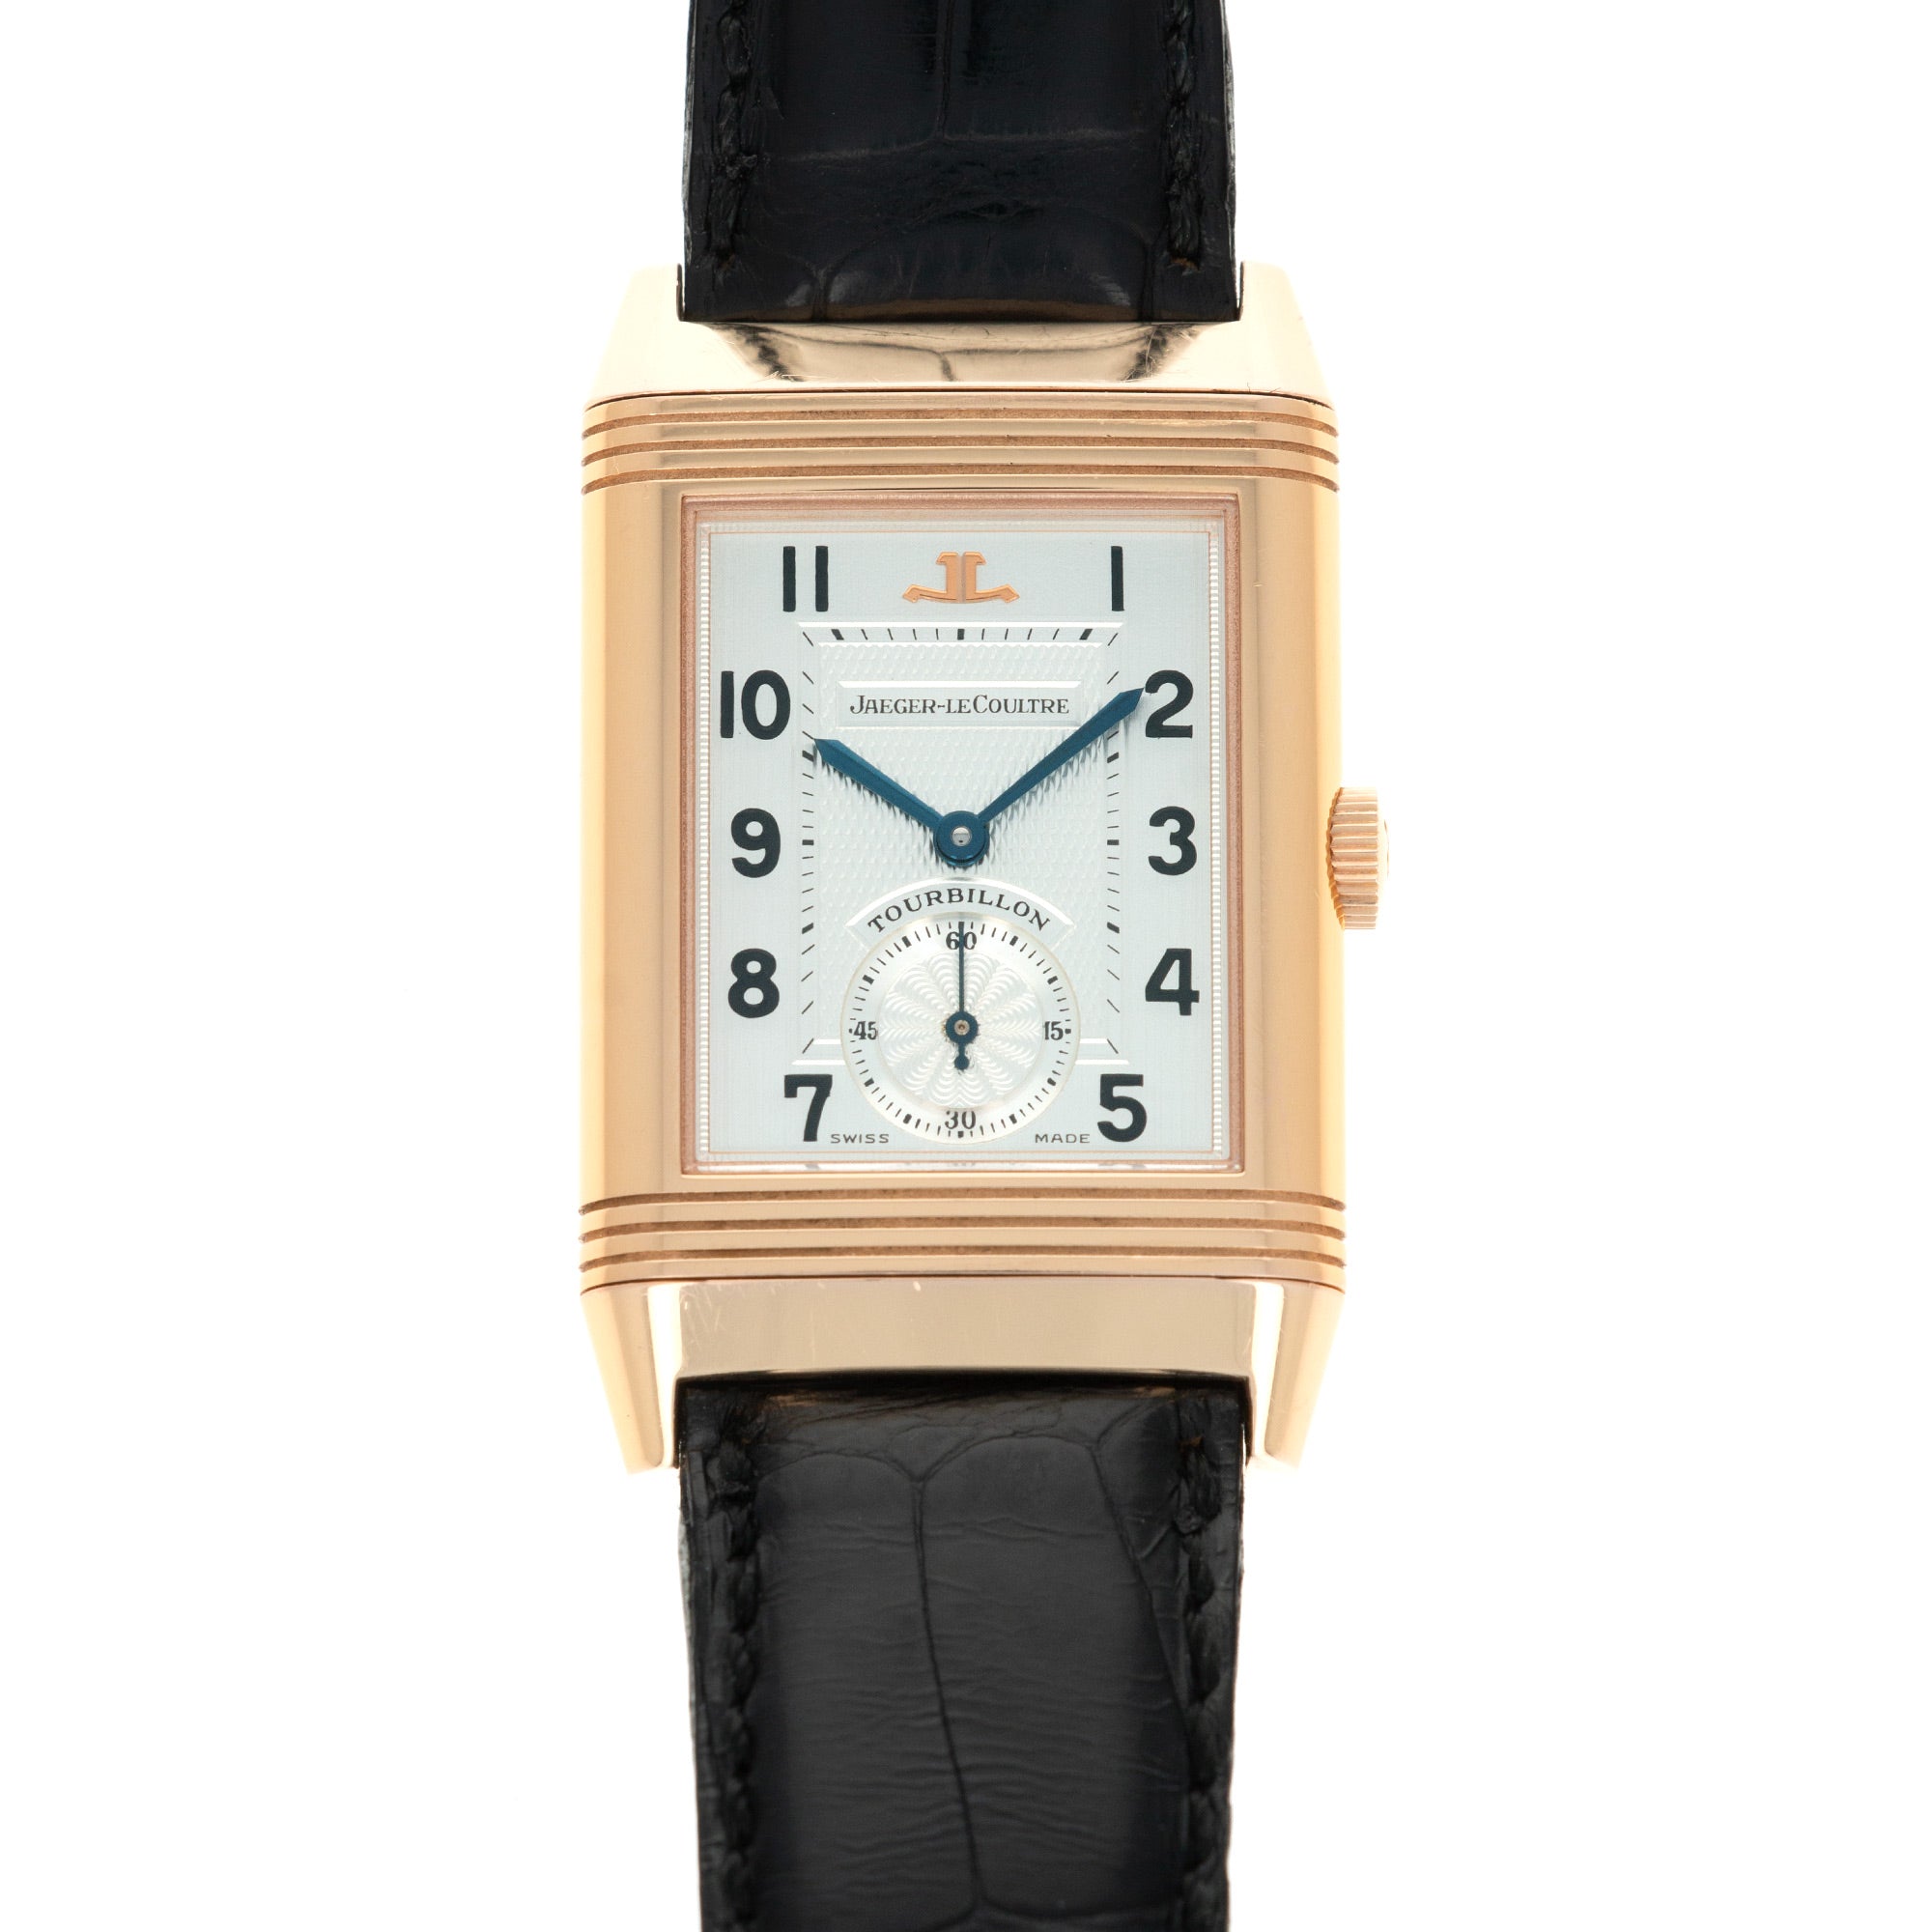 Jaeger LeCoultre - Jaeger Lecoultre Rose Gold Reverso Tourbillon Watch, Ref. 270.2.68 - The Keystone Watches